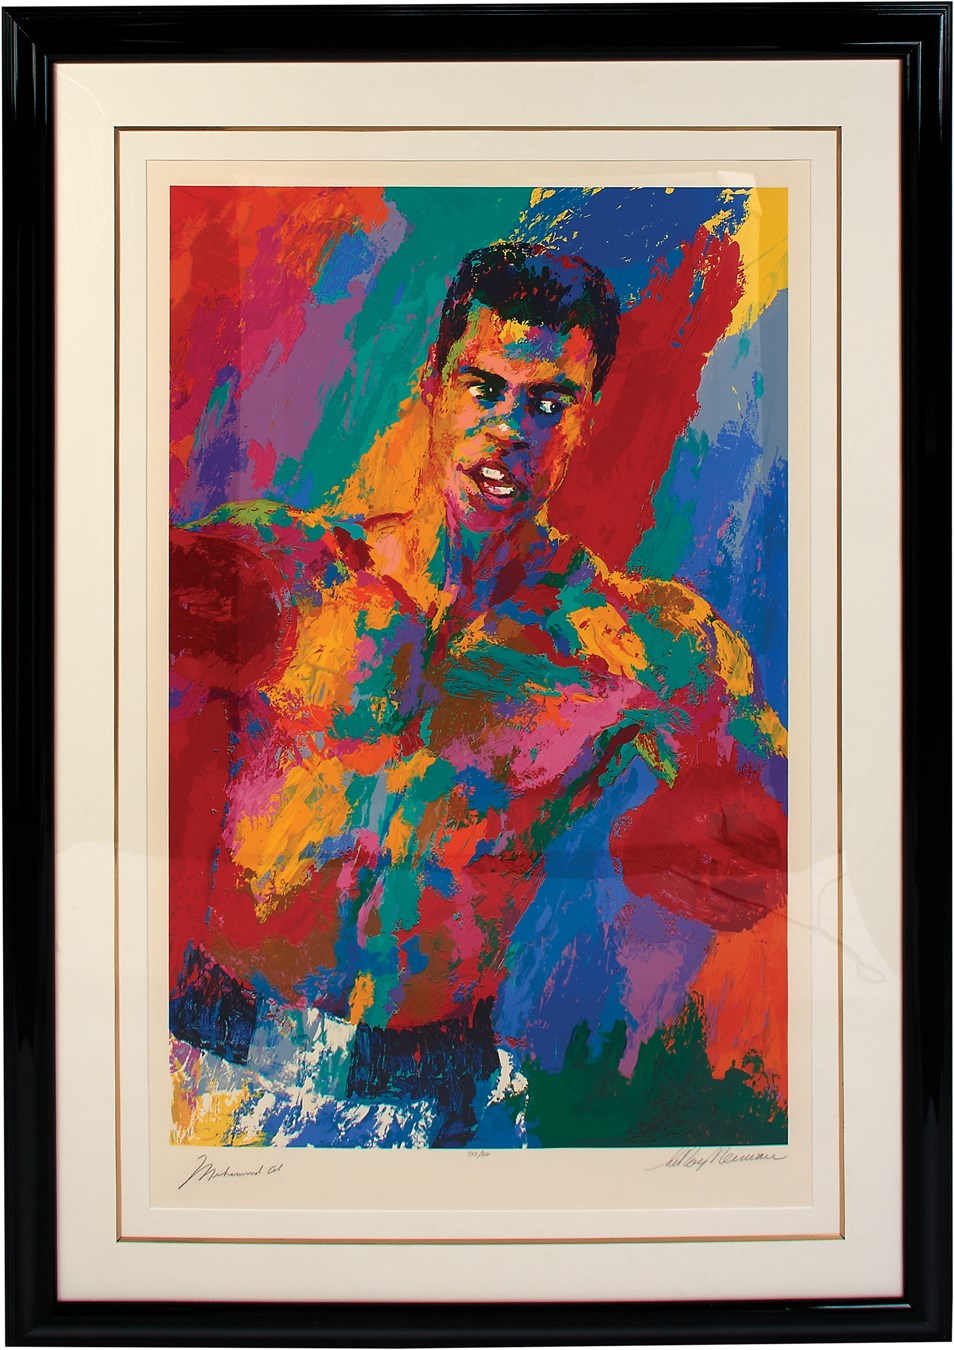 Muhammad Ali Signed "Athlete of the Century" Limited Edition Serigraph by LeRoy Neiman